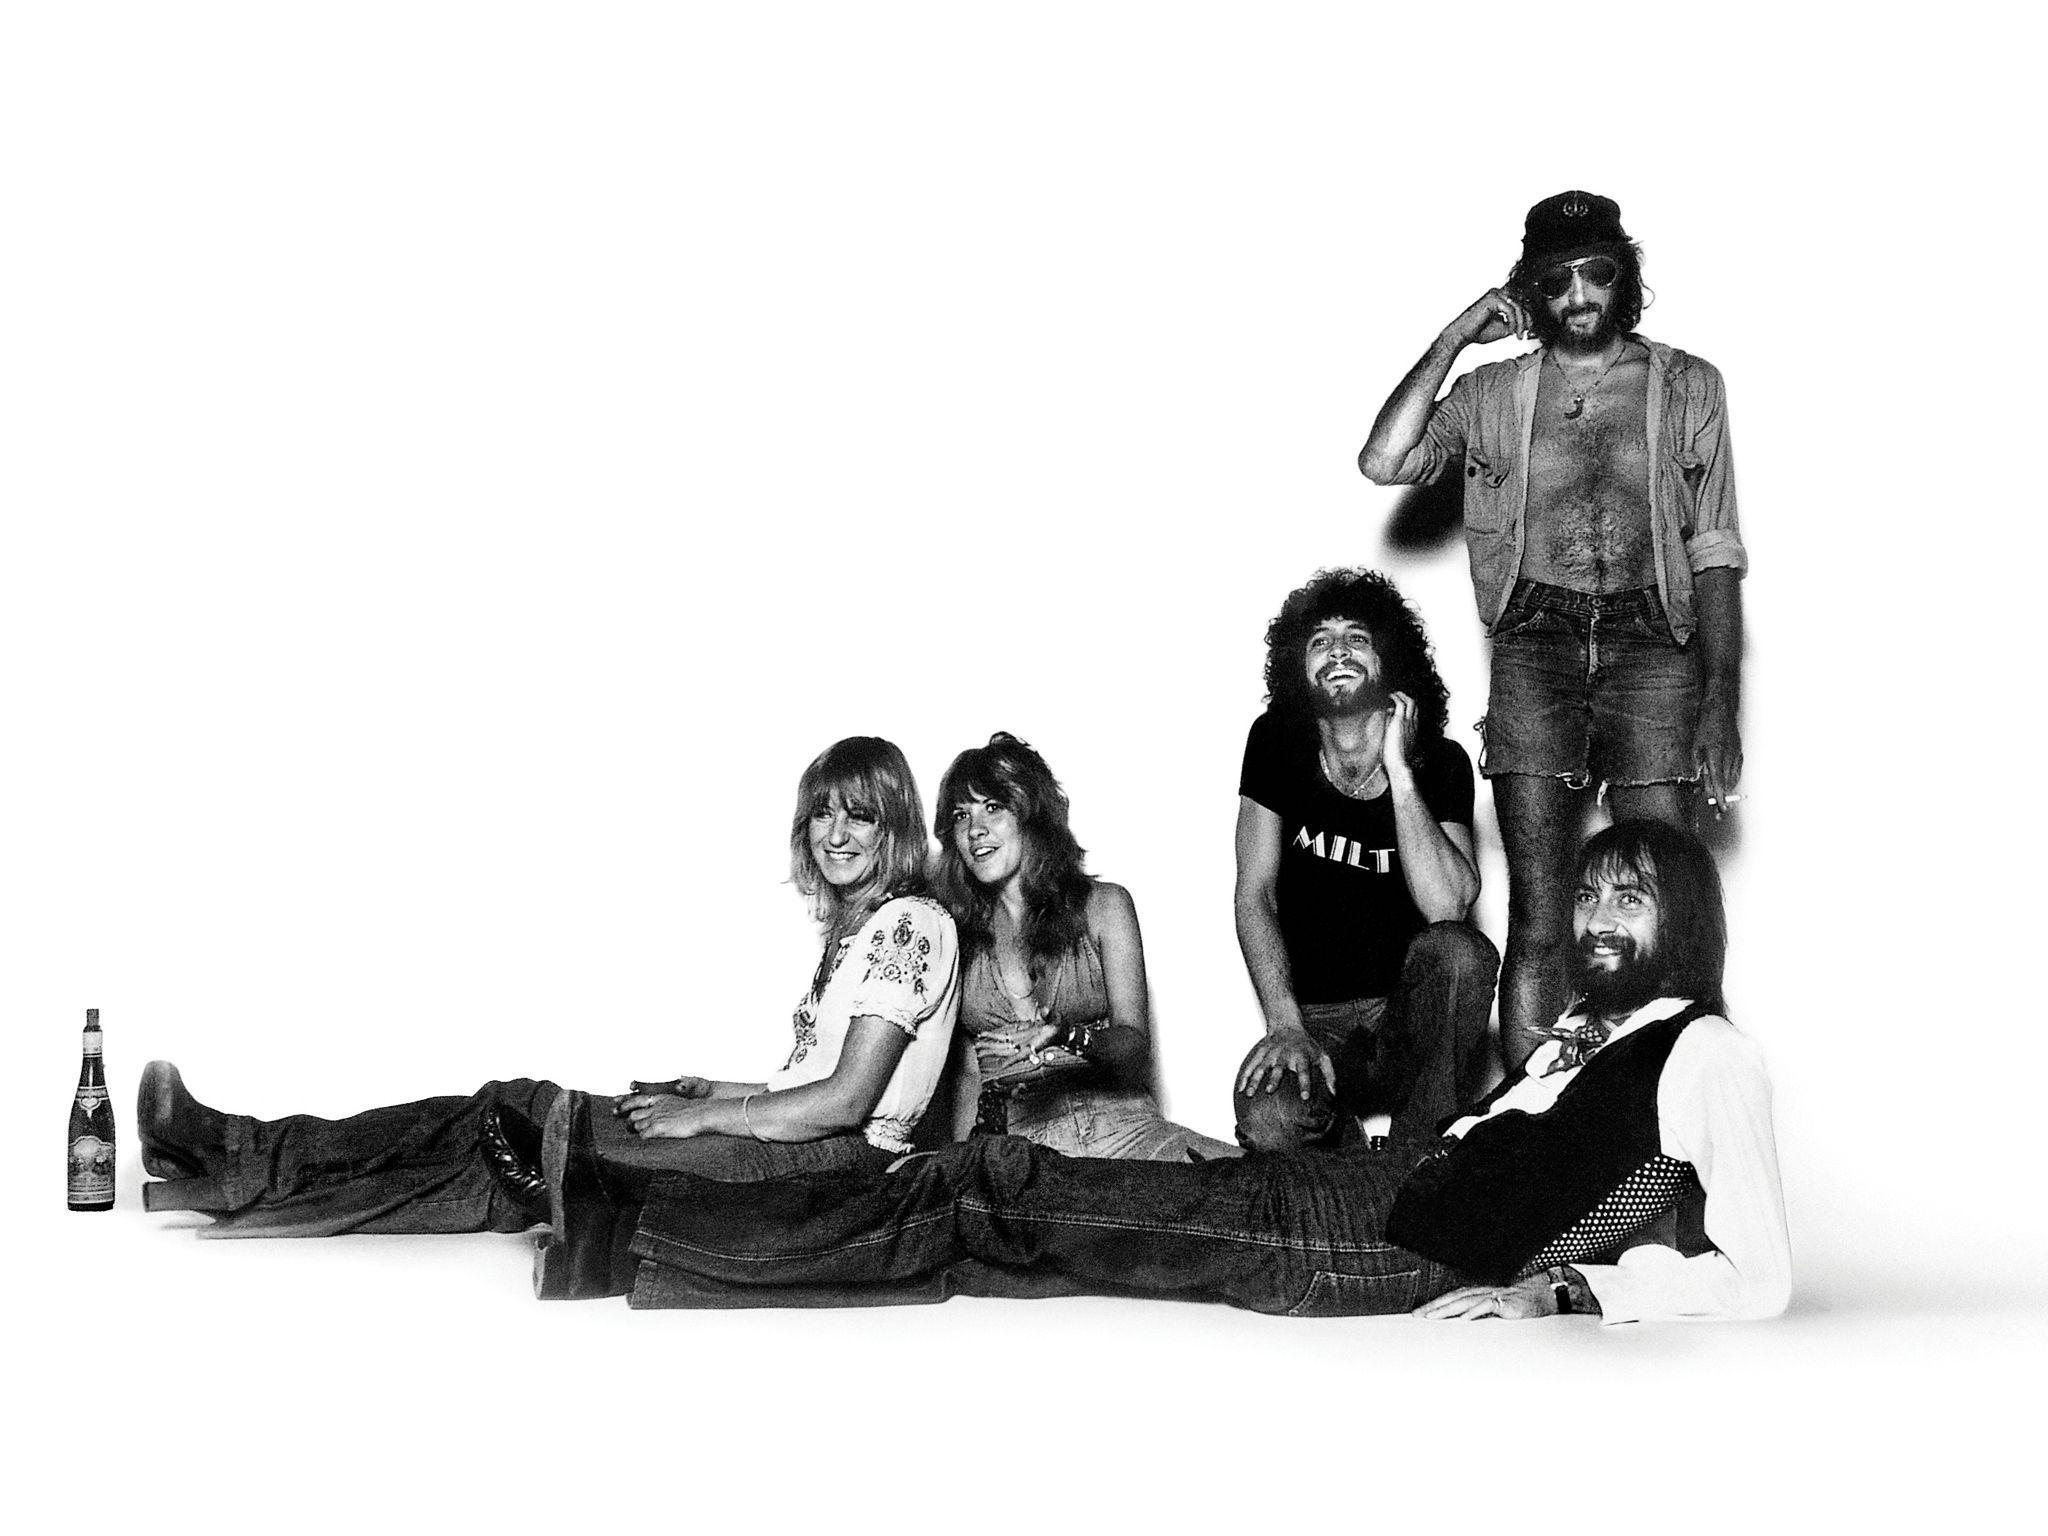 amazing picture of Fleetwood Mac, from 1969 to now